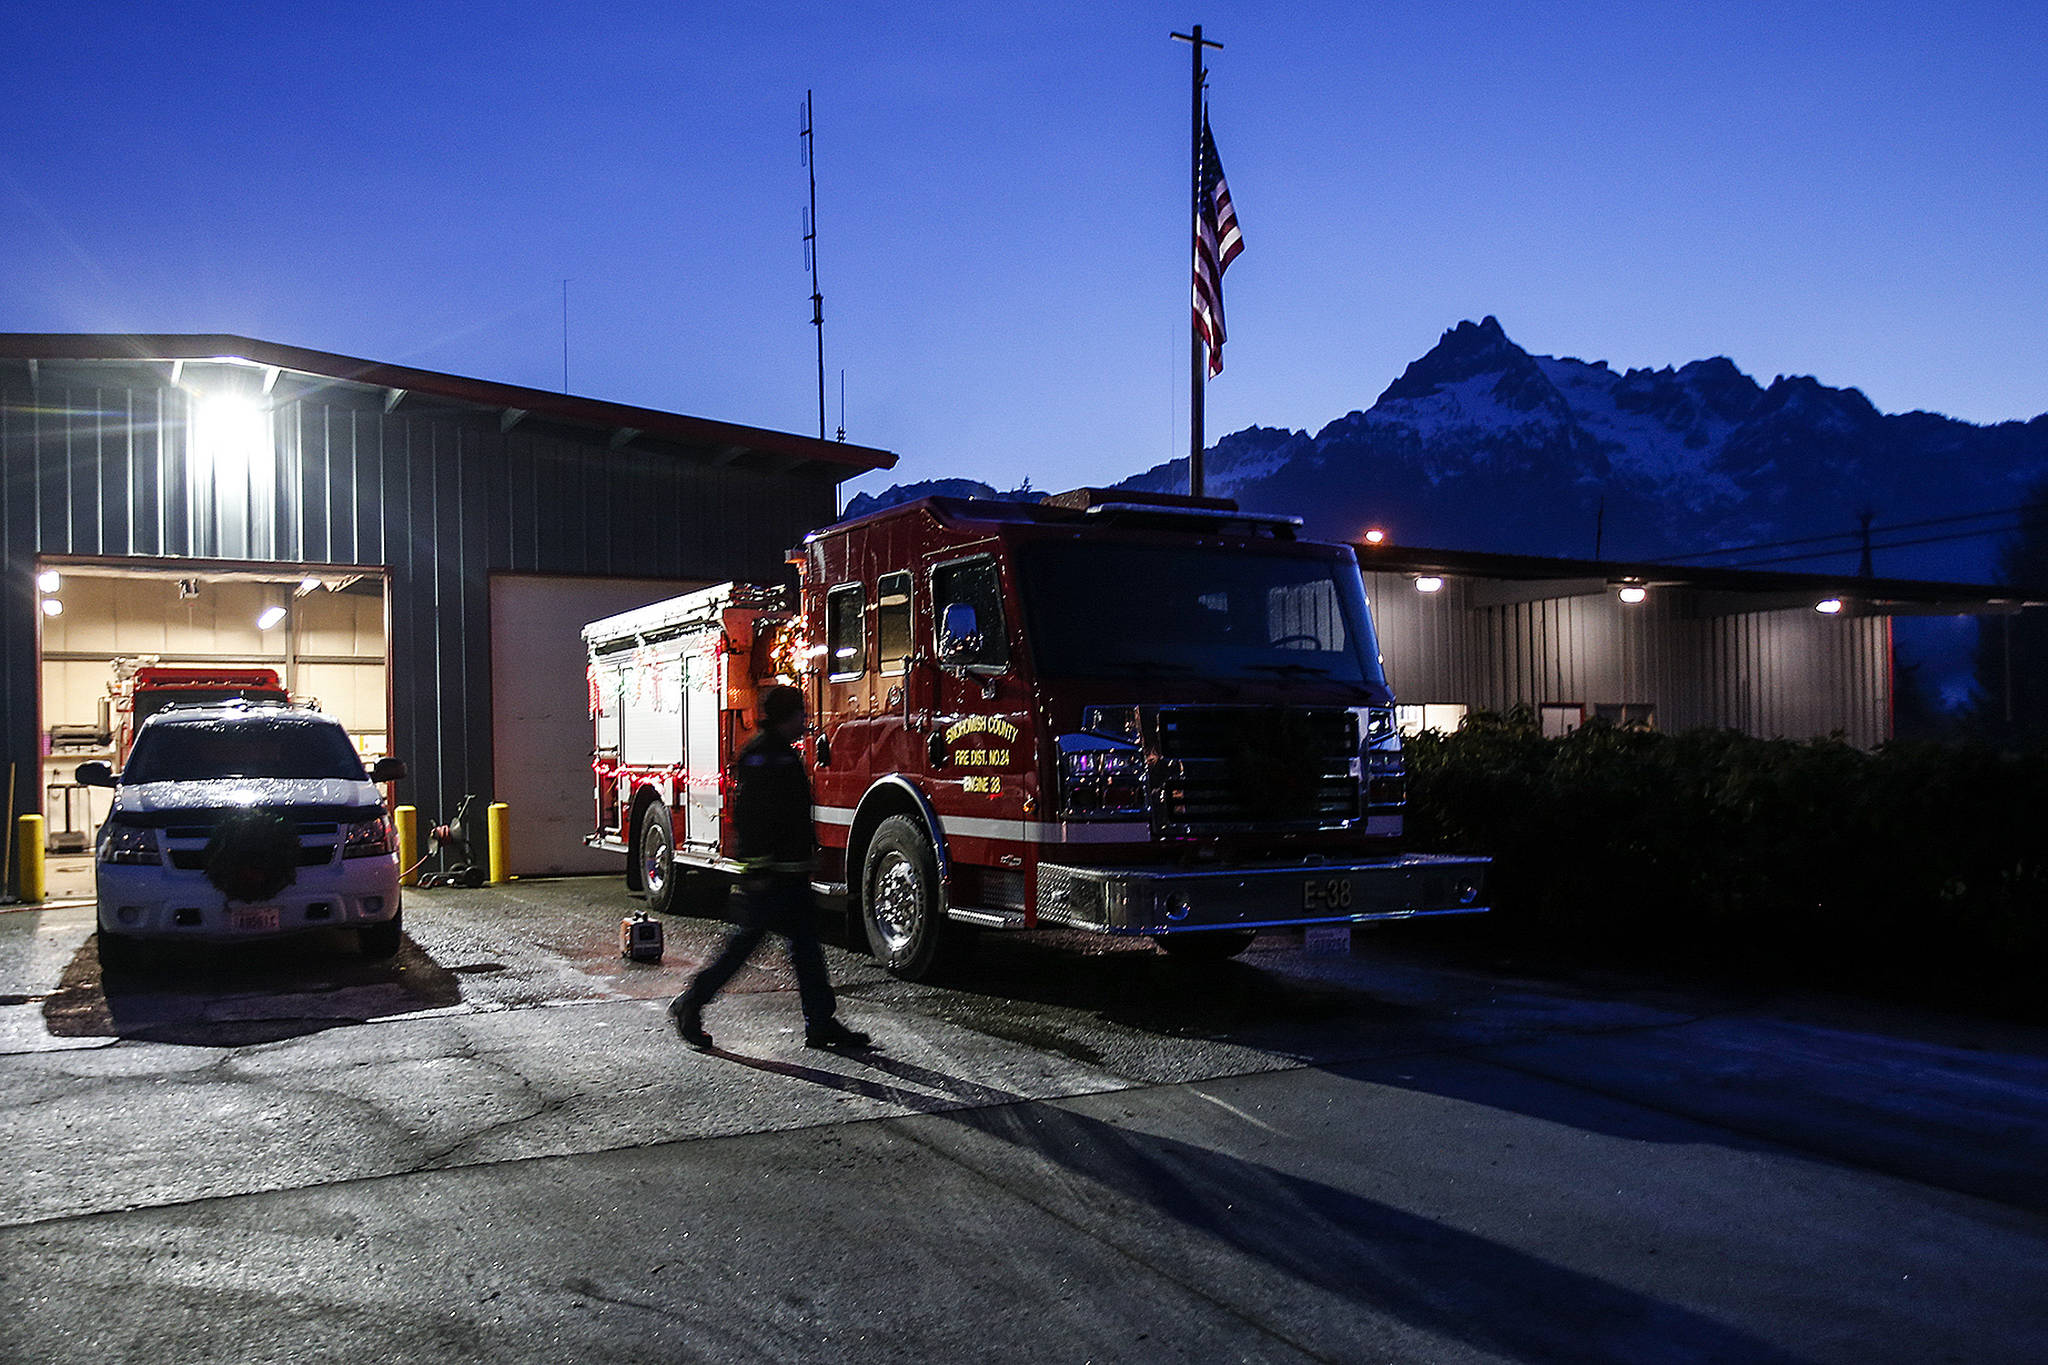 Darrington Fire Capt. Drew Bono walks in front of engine 38 as Whitehorse Mountain glows faintly in the evening light on Tuesday, Dec. 12. Darrington is one of Snohomish County’s few towns that rely on a true volunteer fire department. (Ian Terry / The Herald)